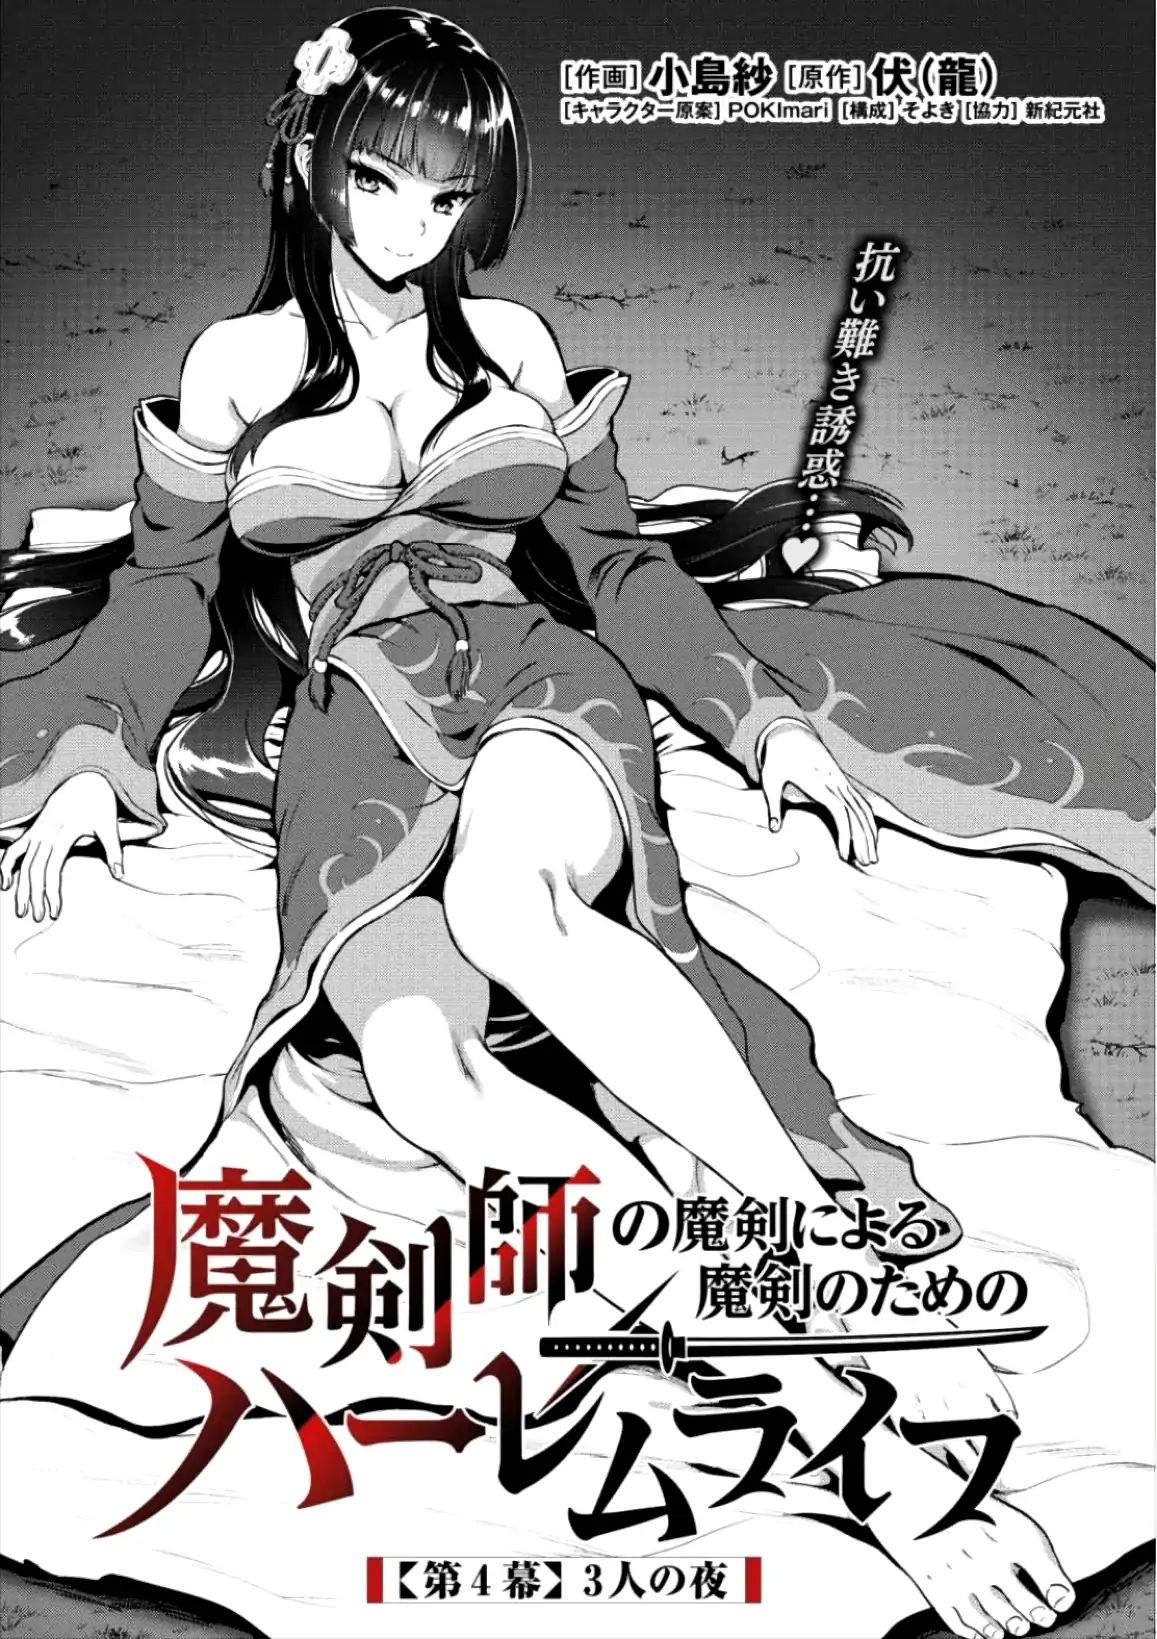 The Cursed Sword Master’s Harem Life: By the Sword, For the Sword, Cursed Sword Master - chapter 4 - #2